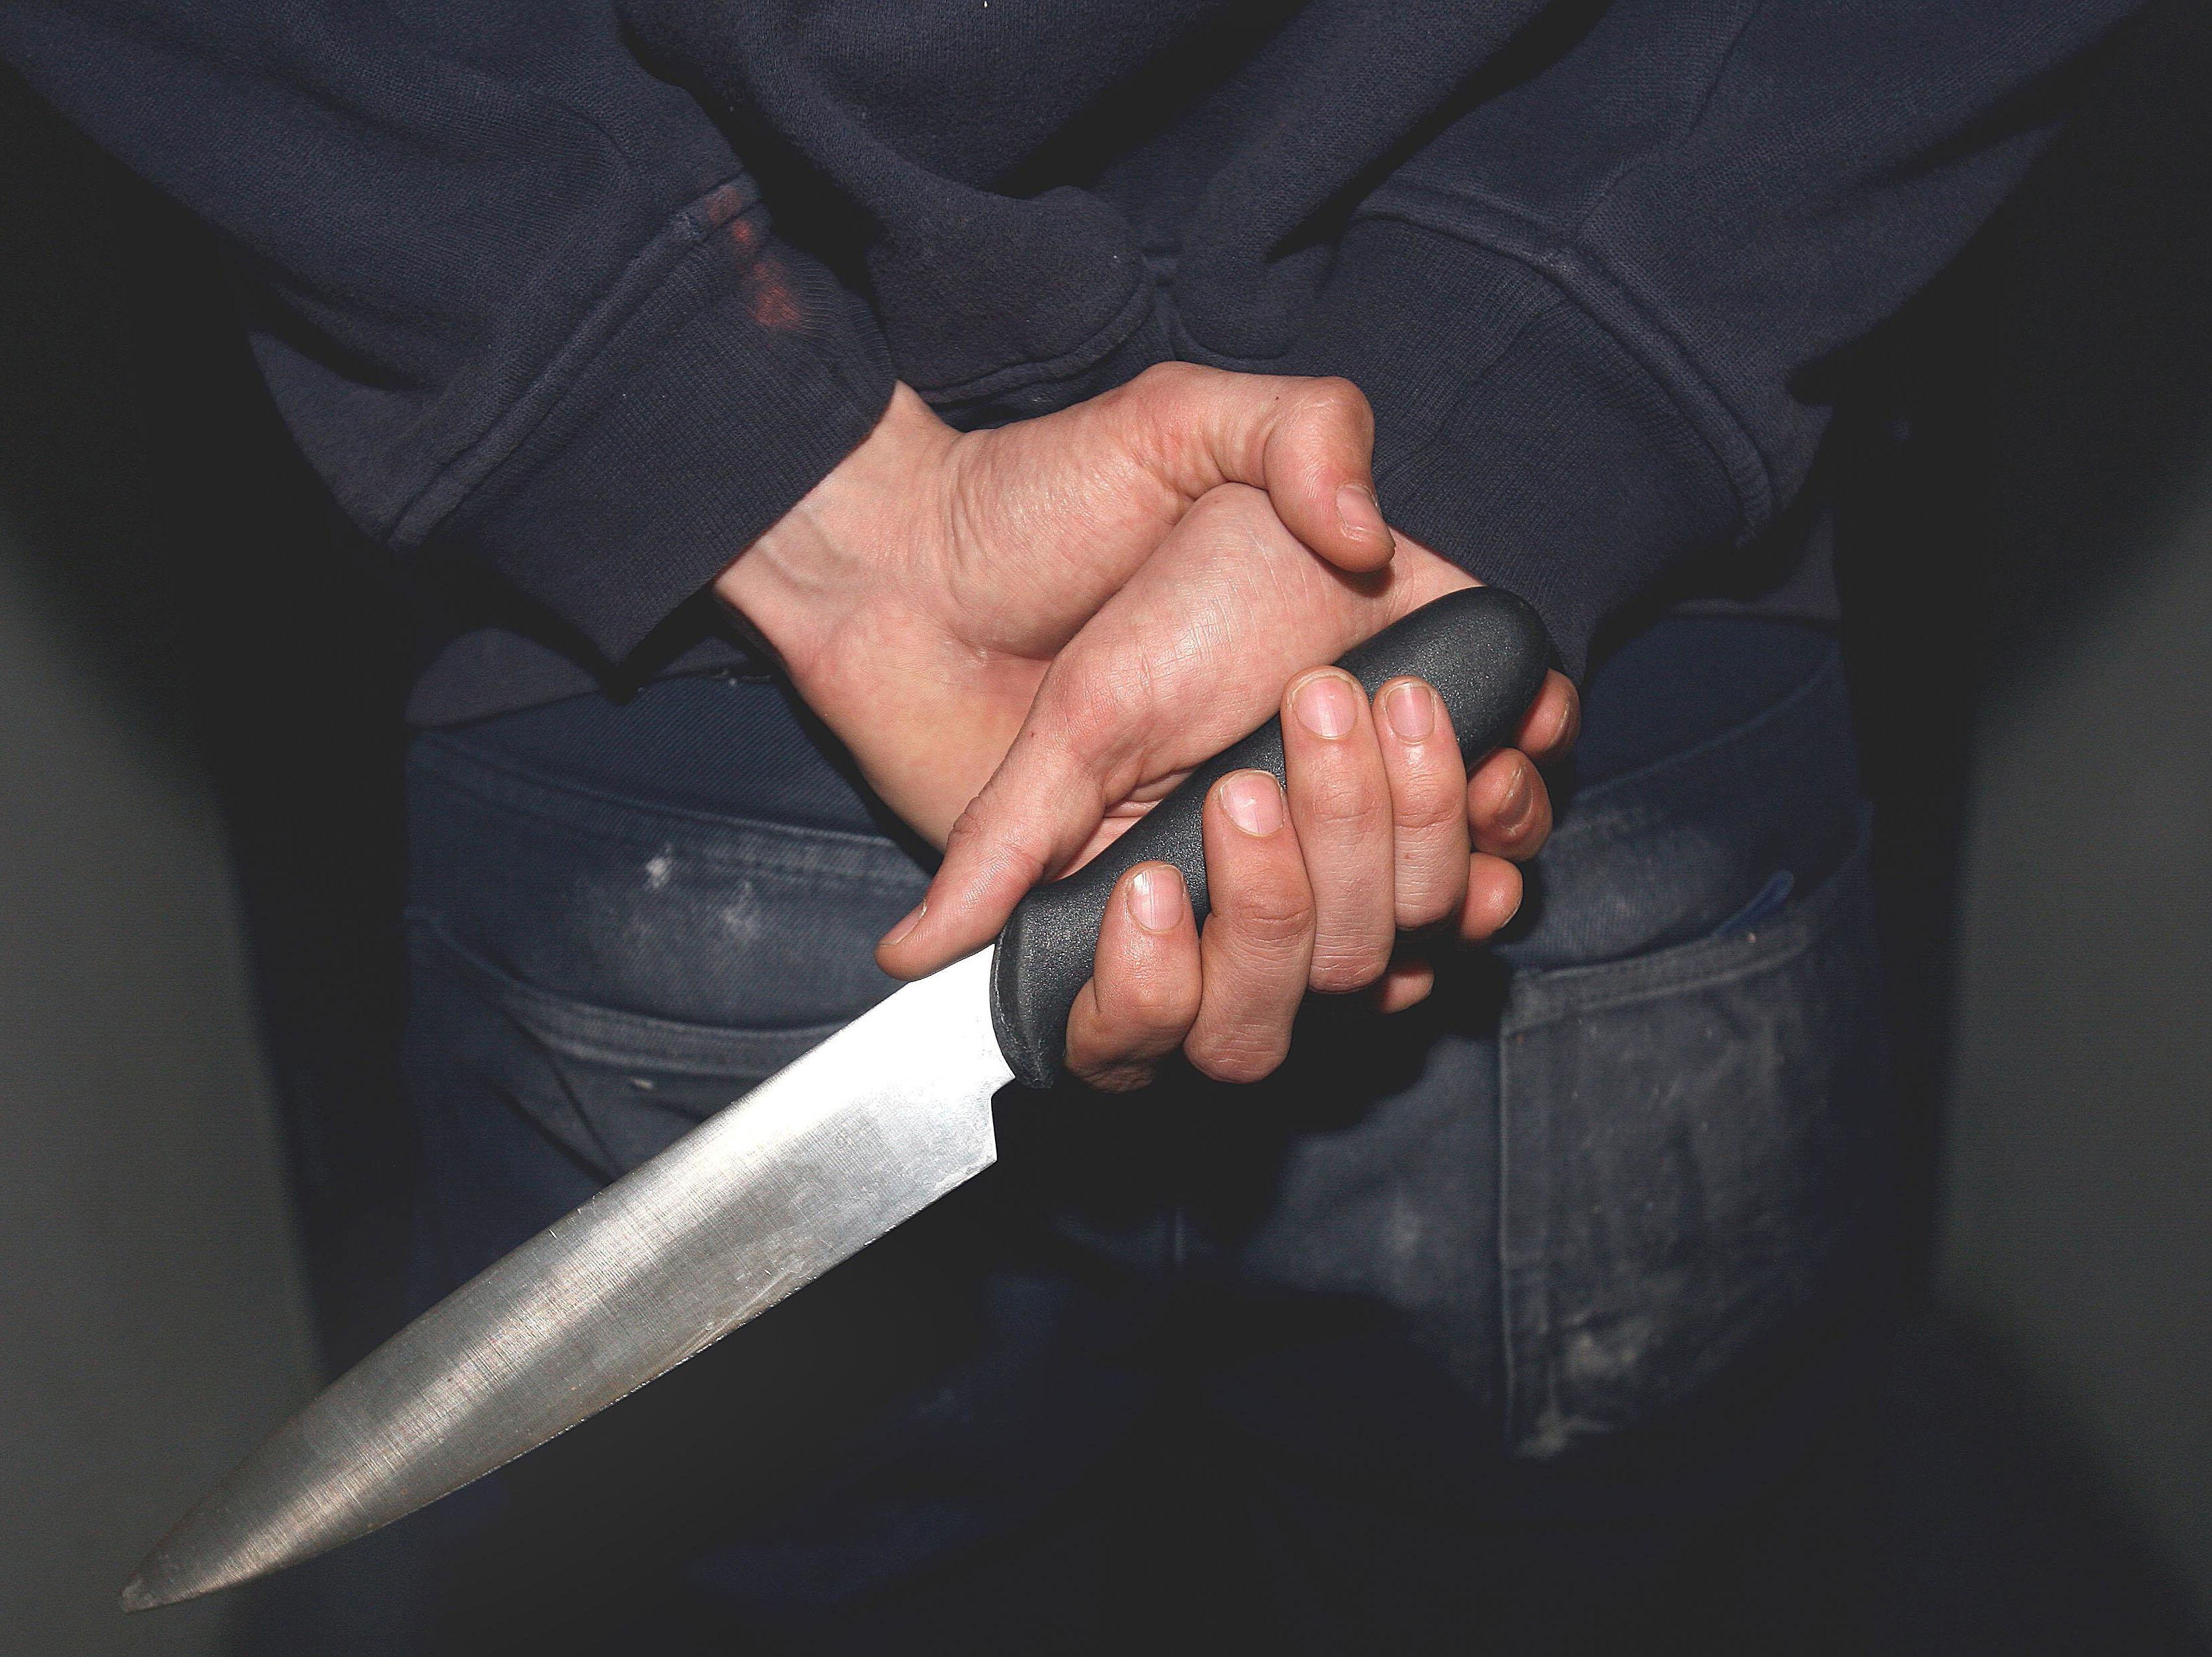 'Too many people have died': West Midlands Police welcome new powers to tackle knife crime